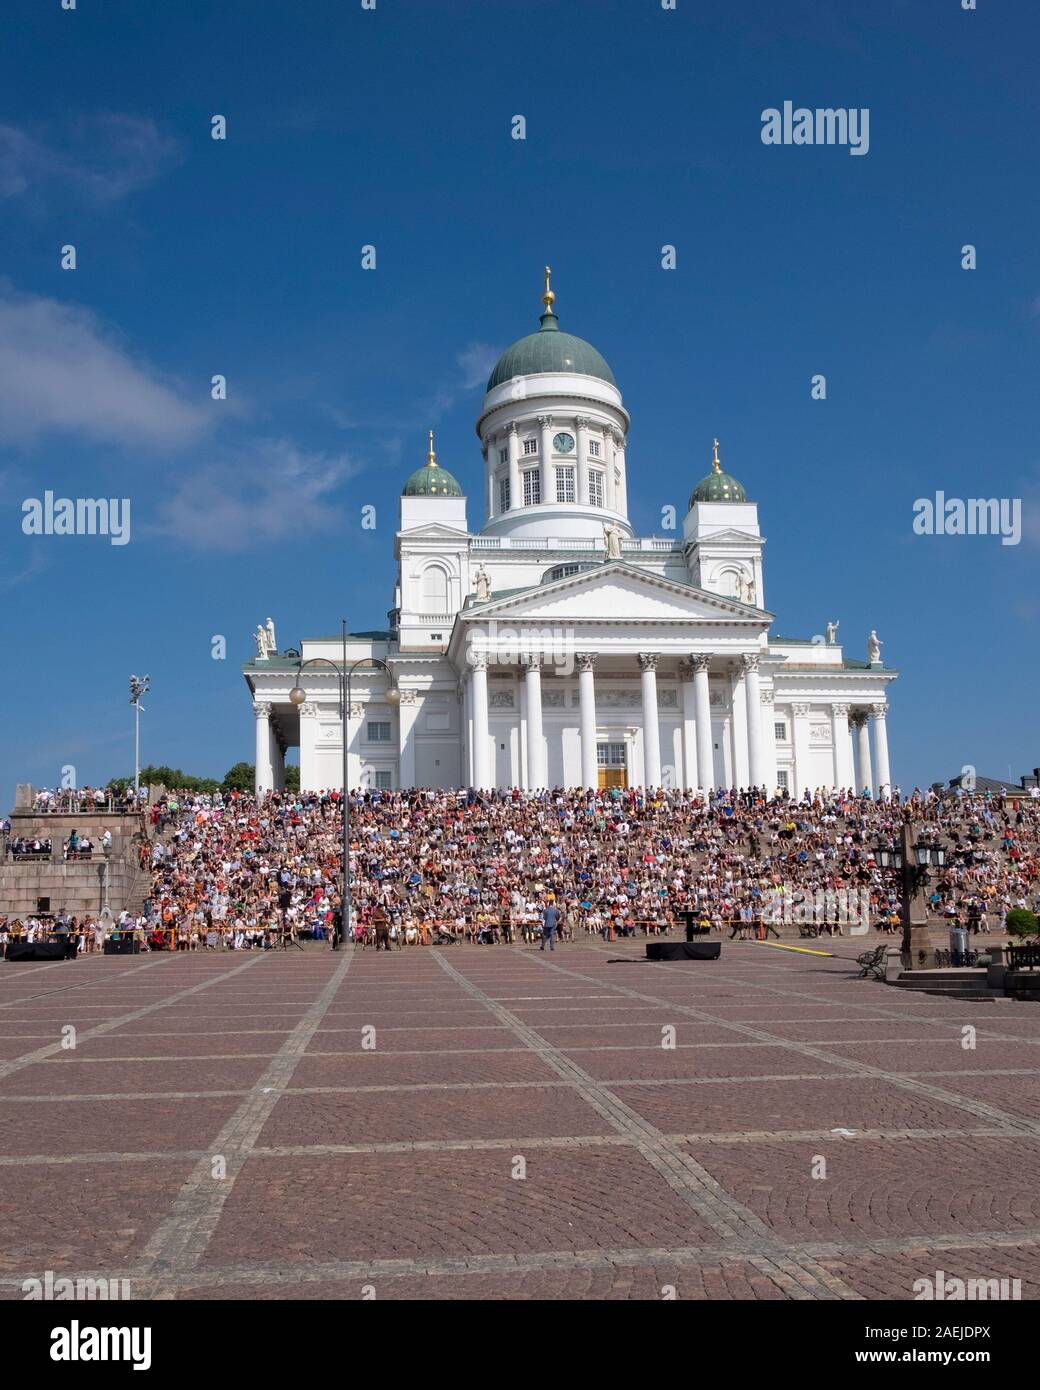 View across Senate Square of people sitting on the steps of the Helsinki Cathedral, Helsinki, Finland, Scandinavia,Europe Stock Photo